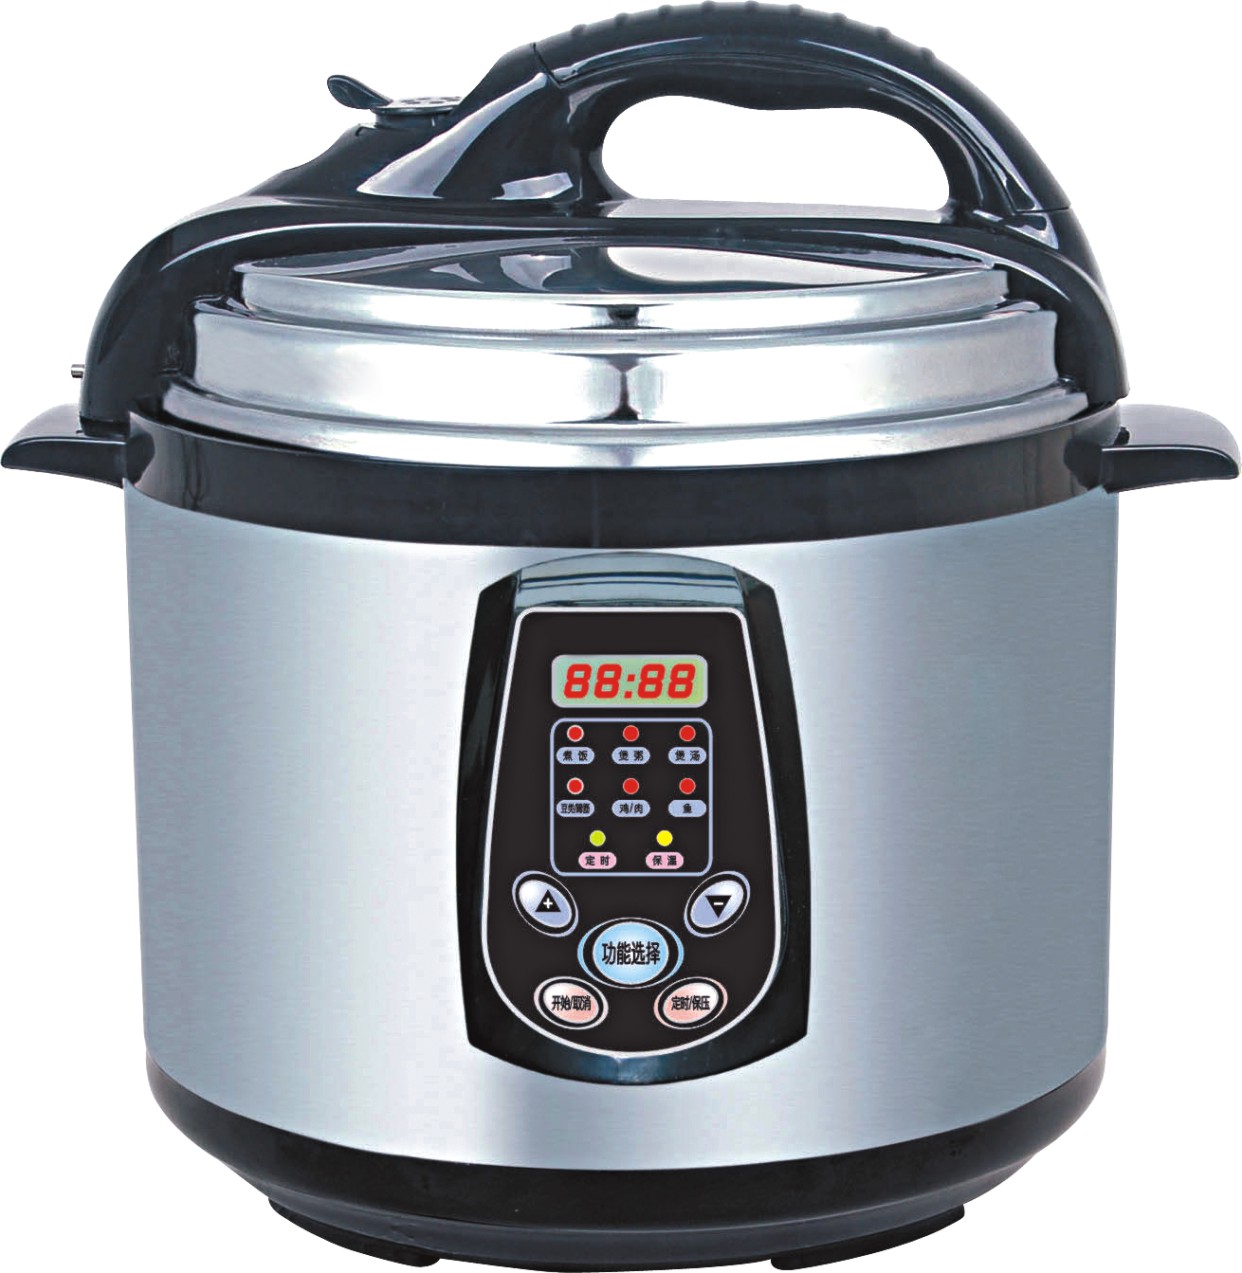 kisense 7-in-1 Programmable Pressure Cooker 6Qt/1000W Stainless Steel Cooking Pot and Exterior